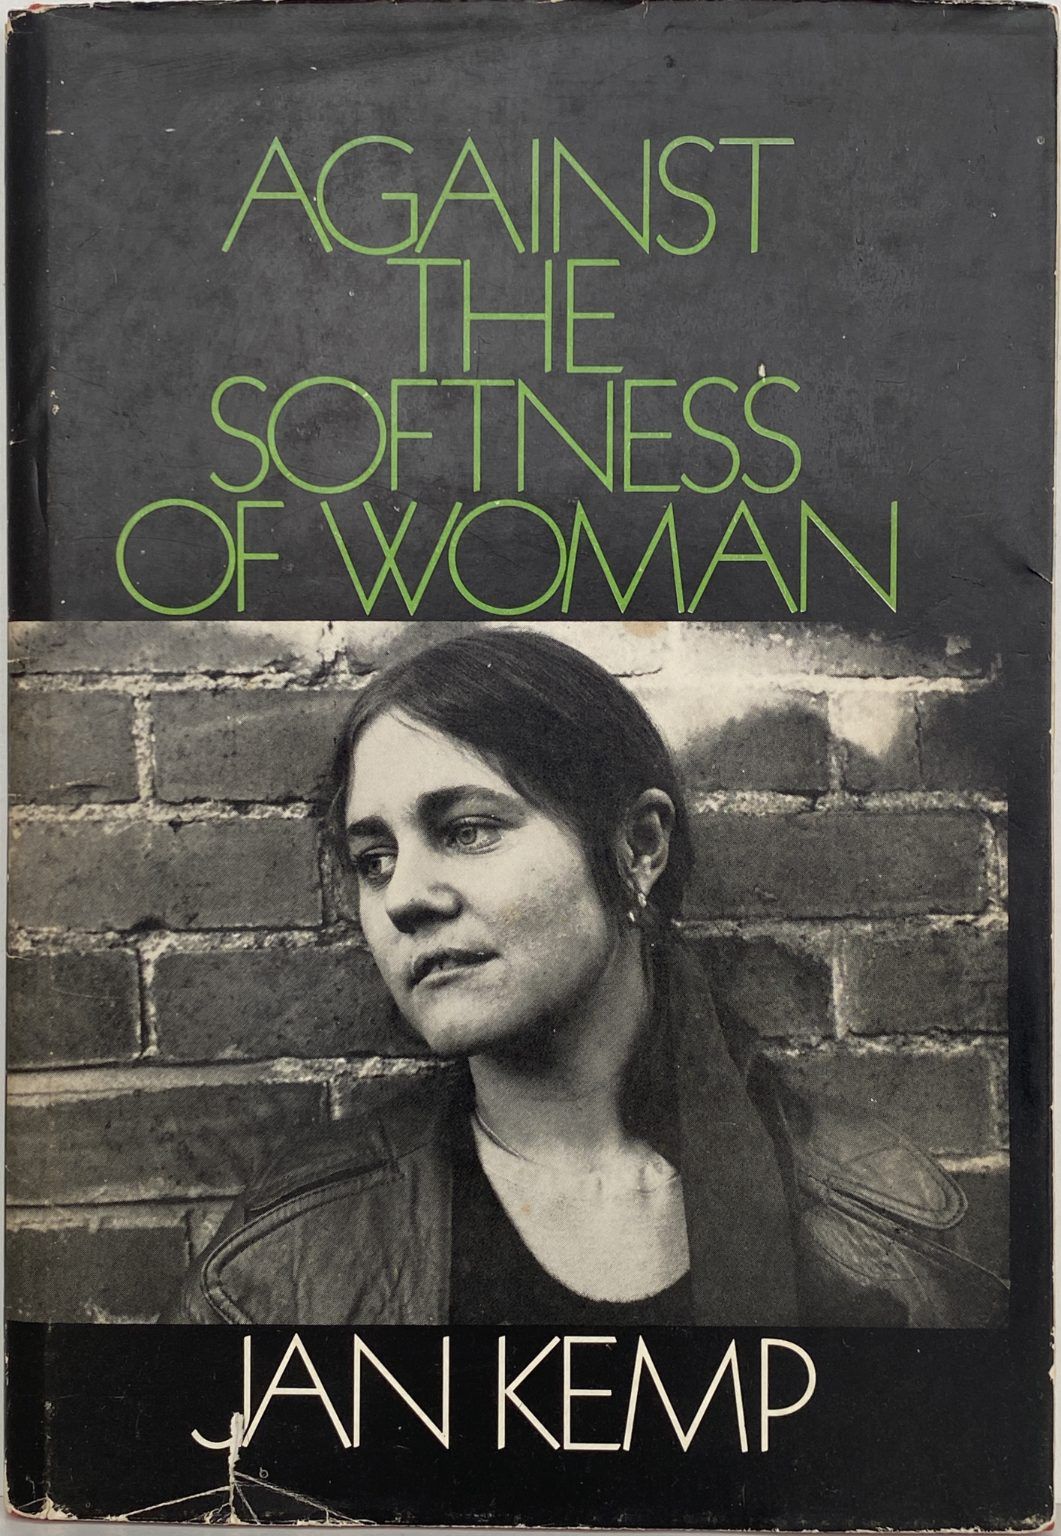 AGAINST THE SOFTNESS OF WOMAN: Poems by Jan Kemp